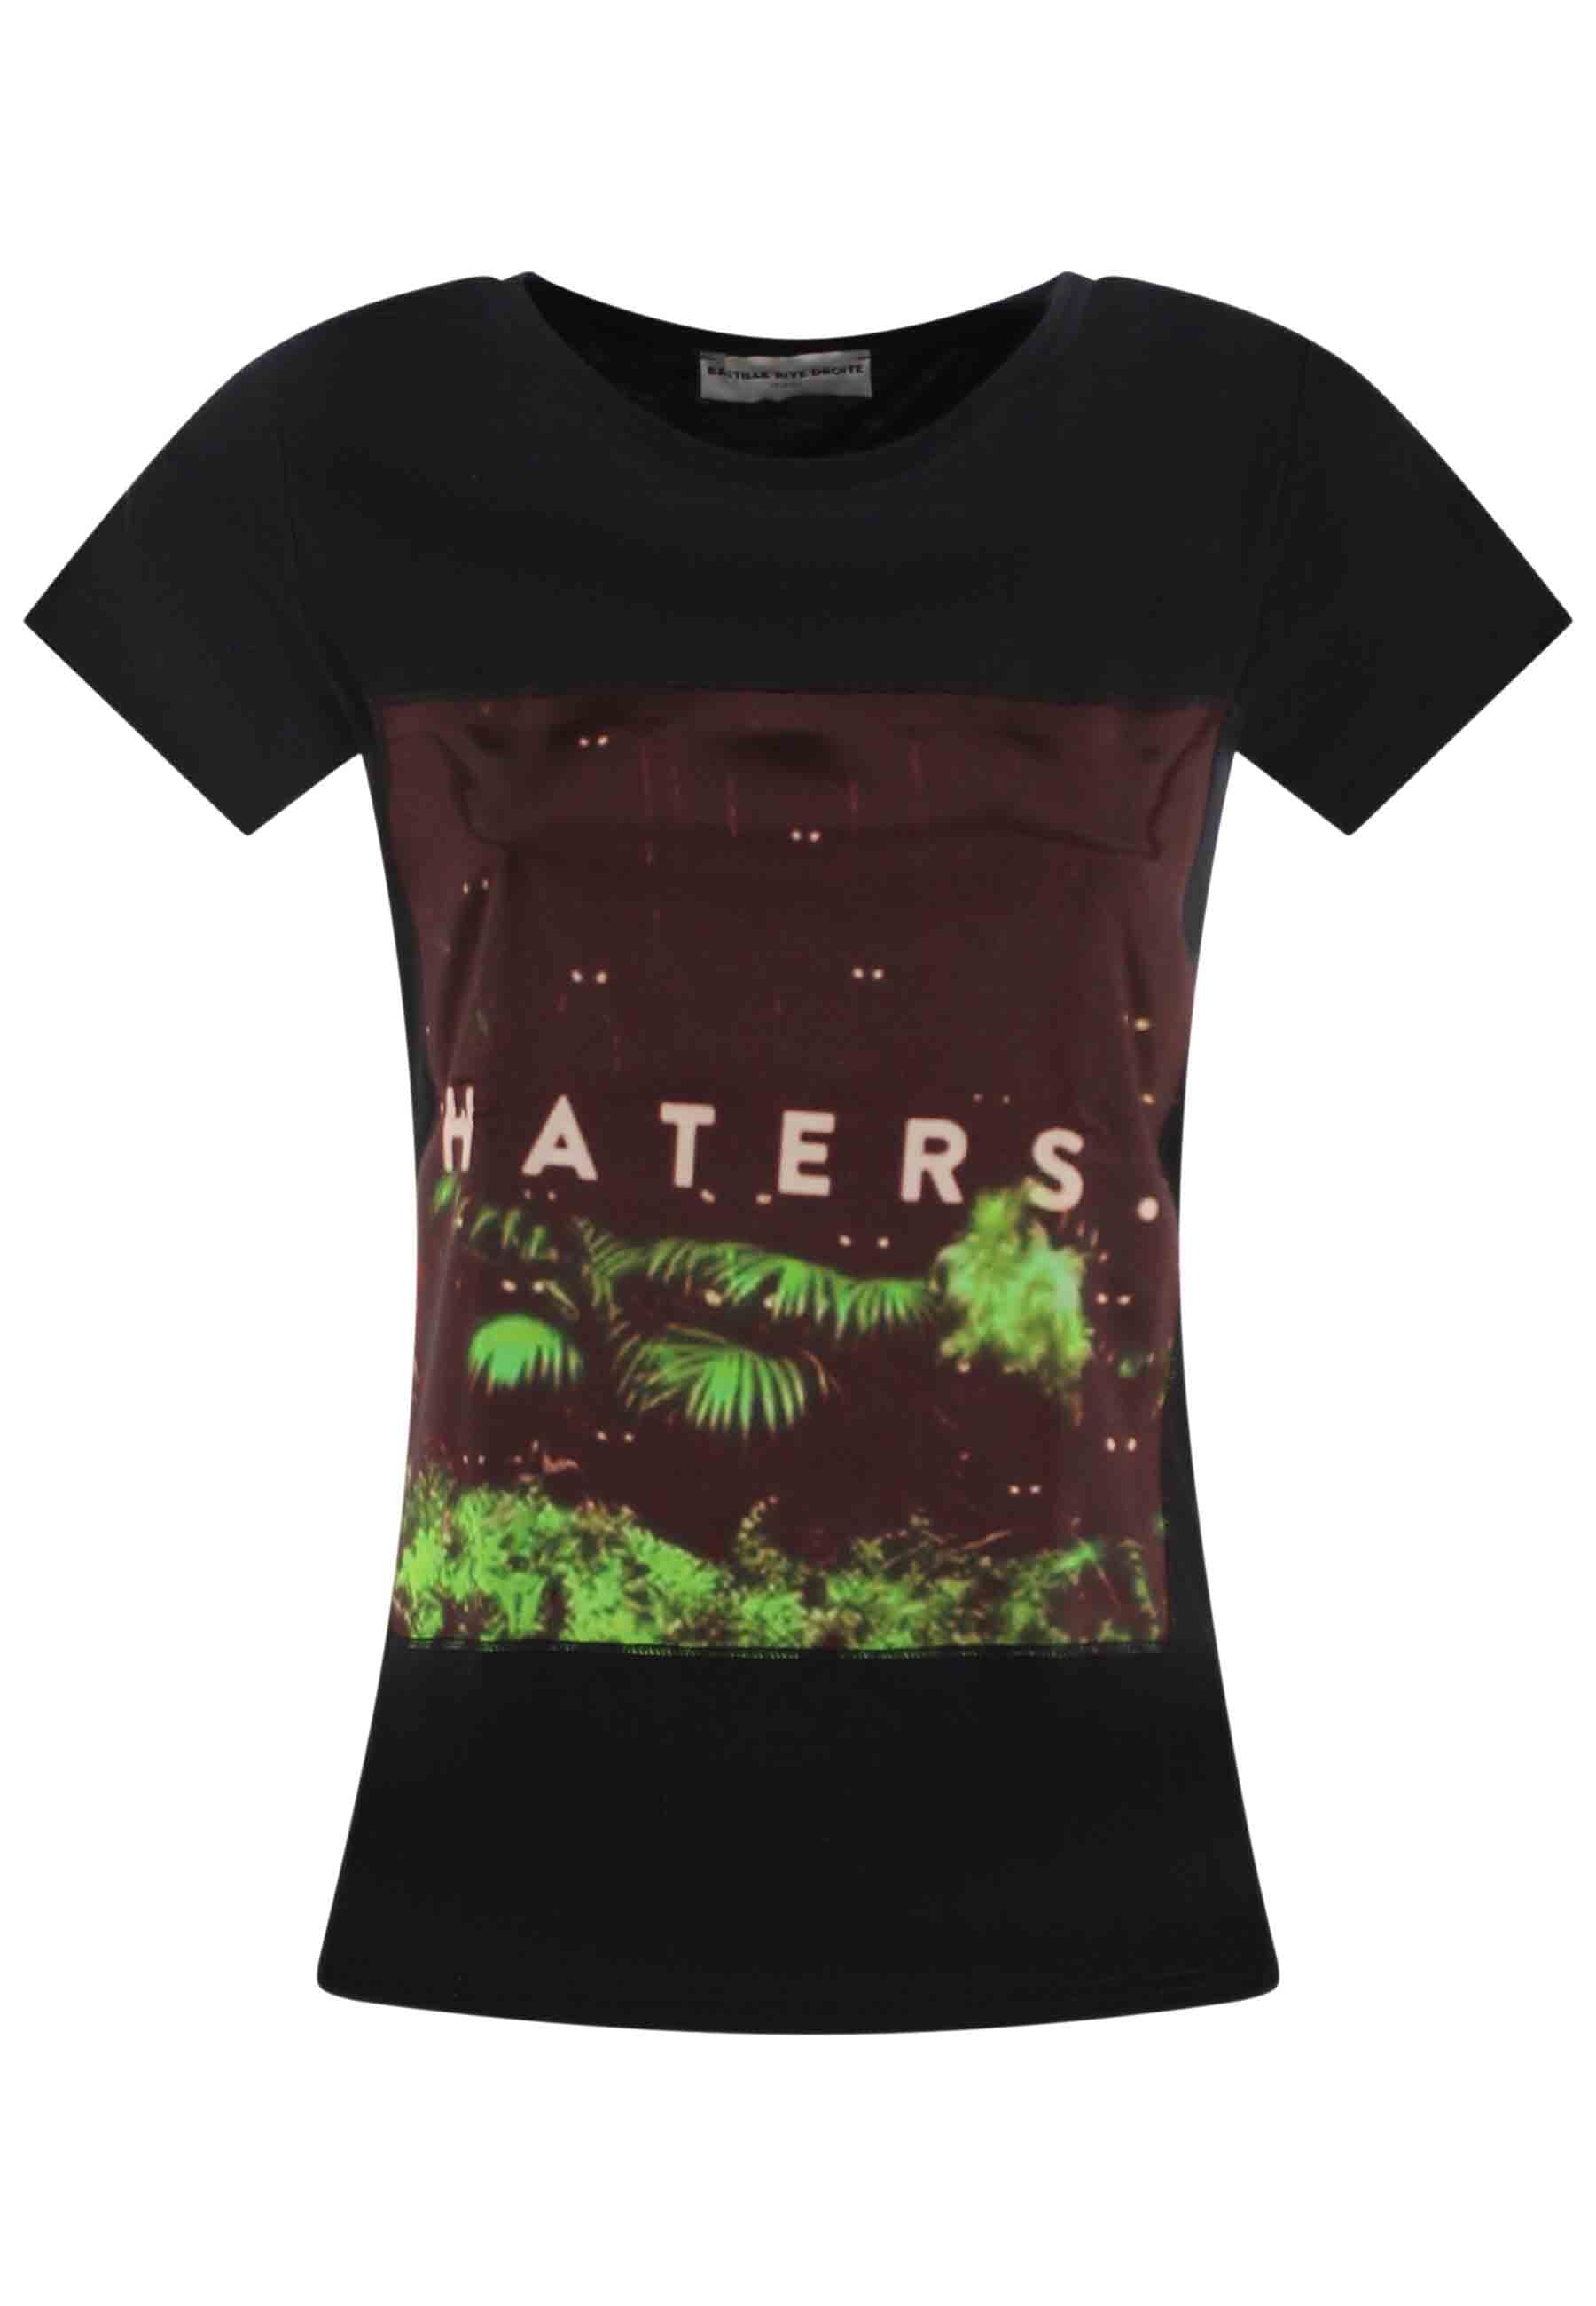 Icons women's t-shirt in black cotton with silk print